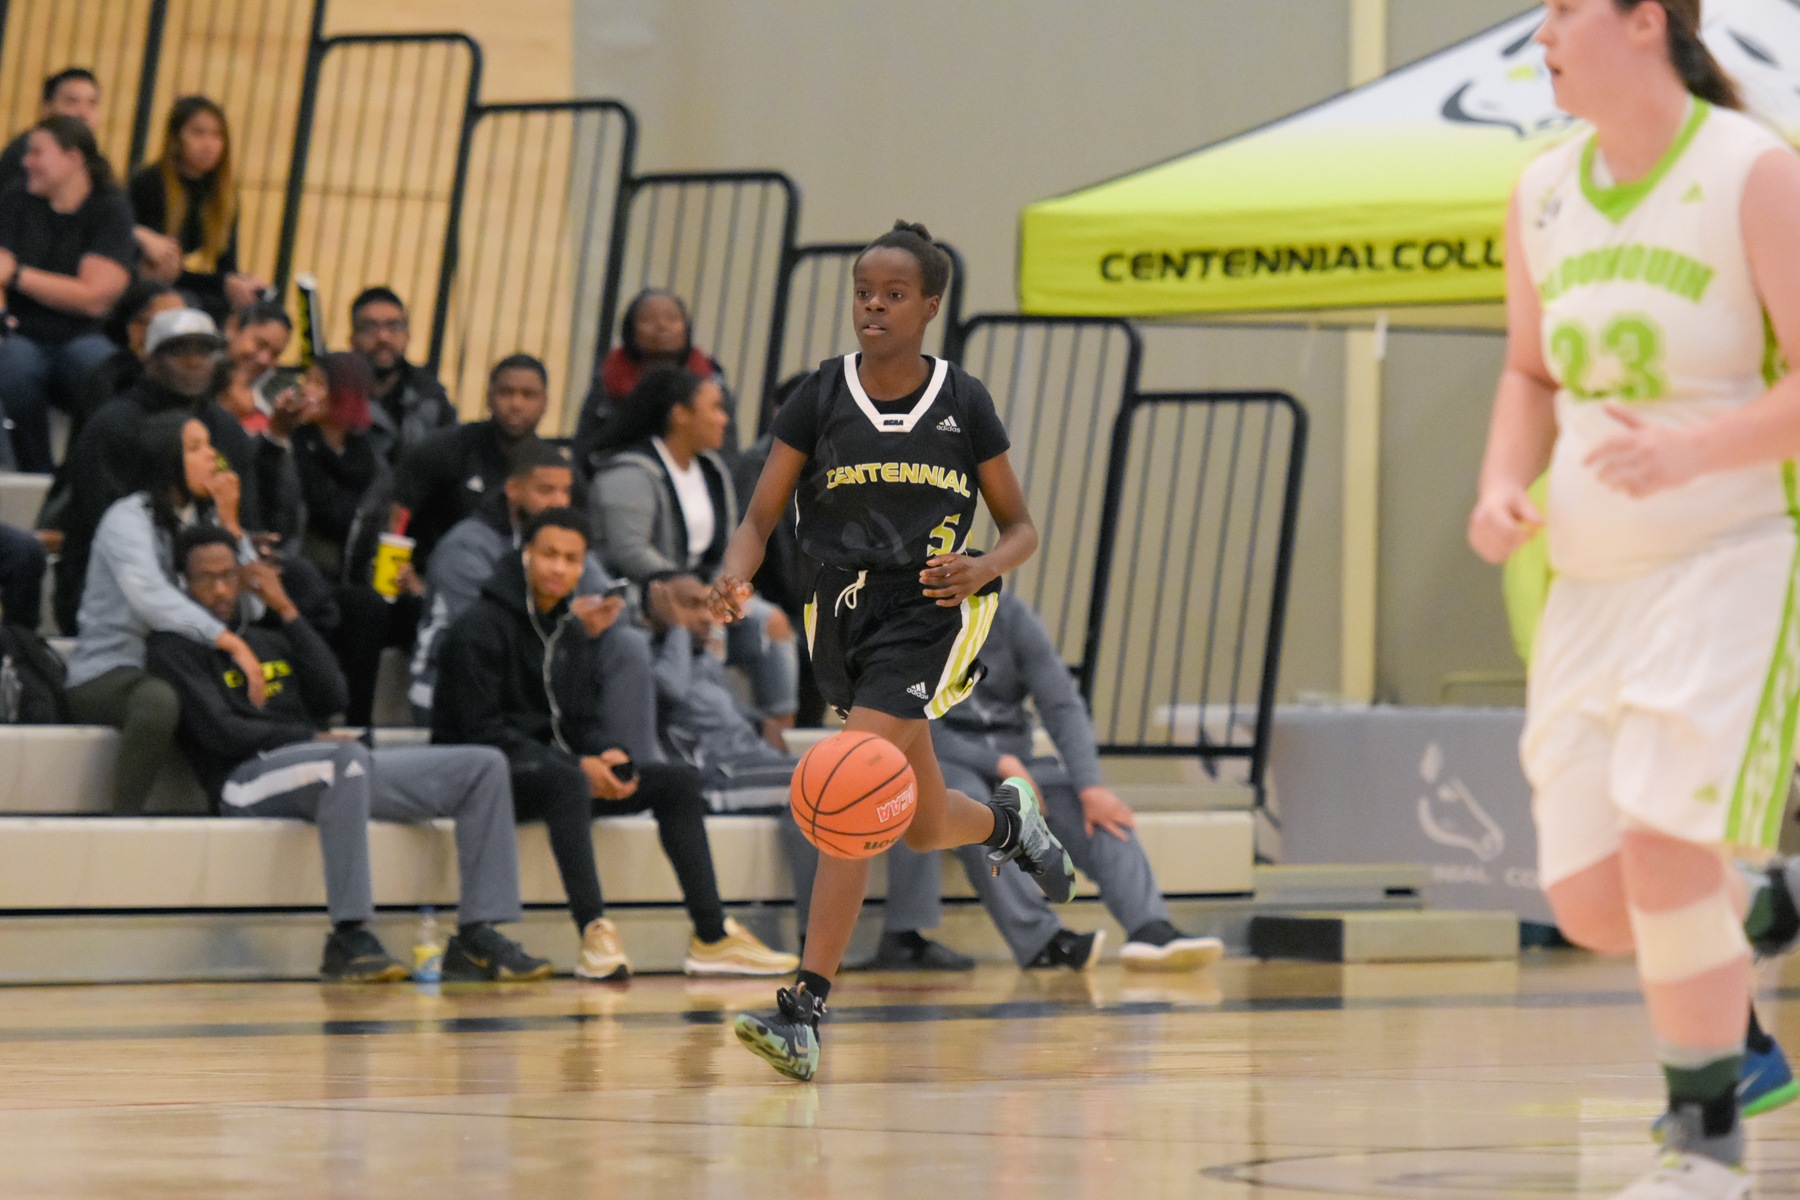 Centennial Colts guard Mariam Konate dribbles the ball in transition after committing one of her seven steals in the game. The Colts took care of work in their home opener, beating the Algonquin Thunder, 57-36, at Athletic and Wellness Centre. (Yvano Antonio/ Colts Athletics)